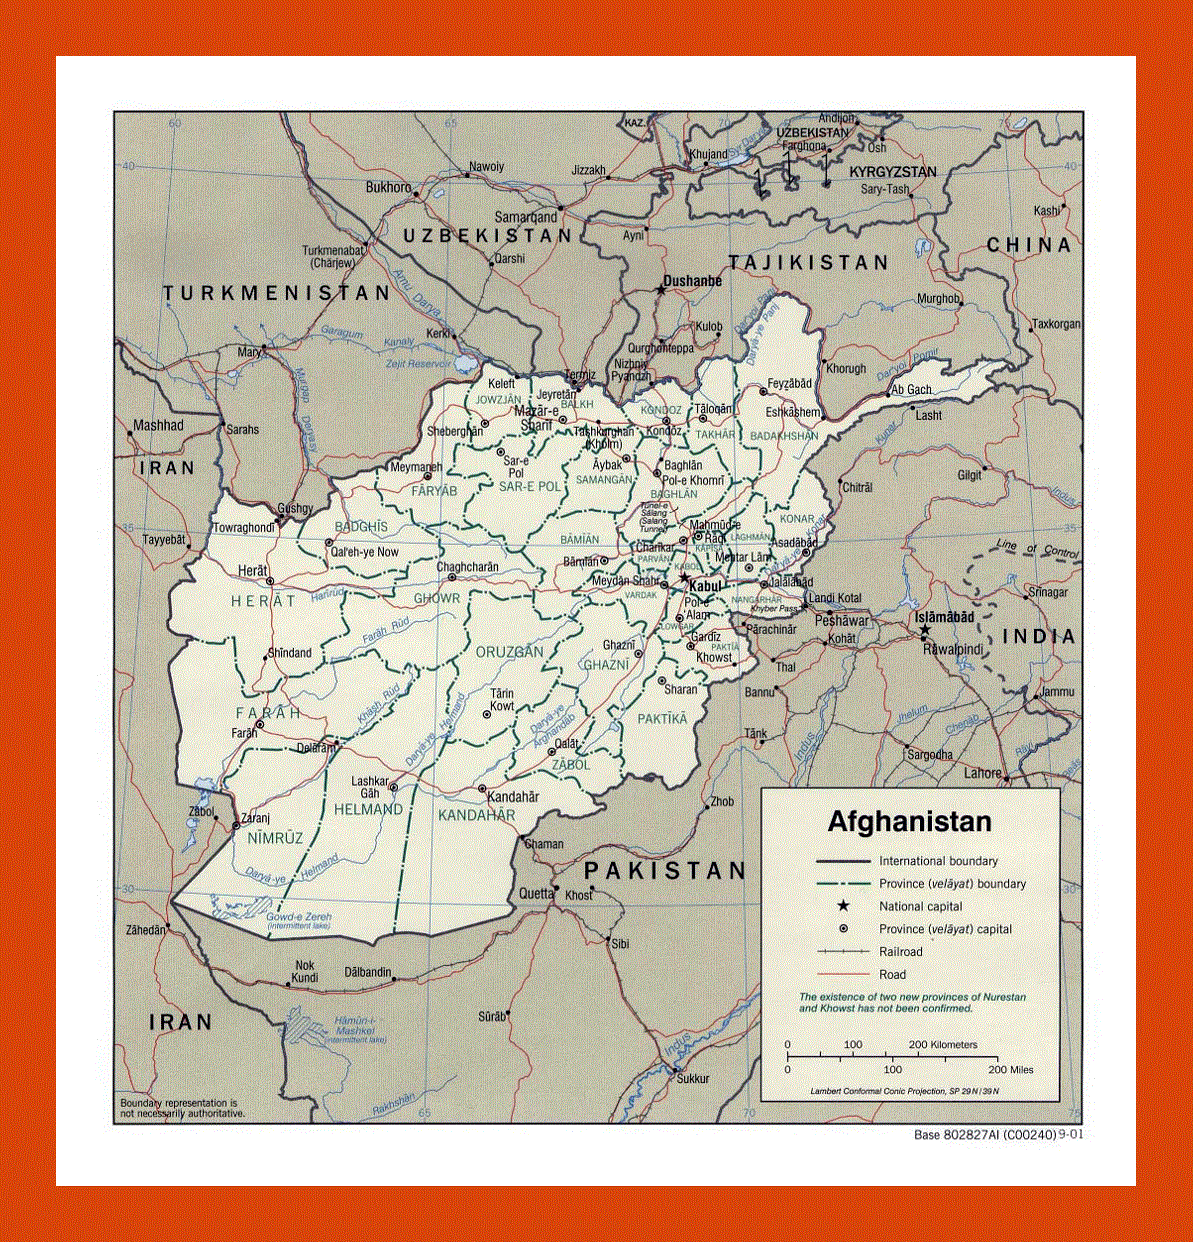 Political and administrative map of Afghanistan - 2001